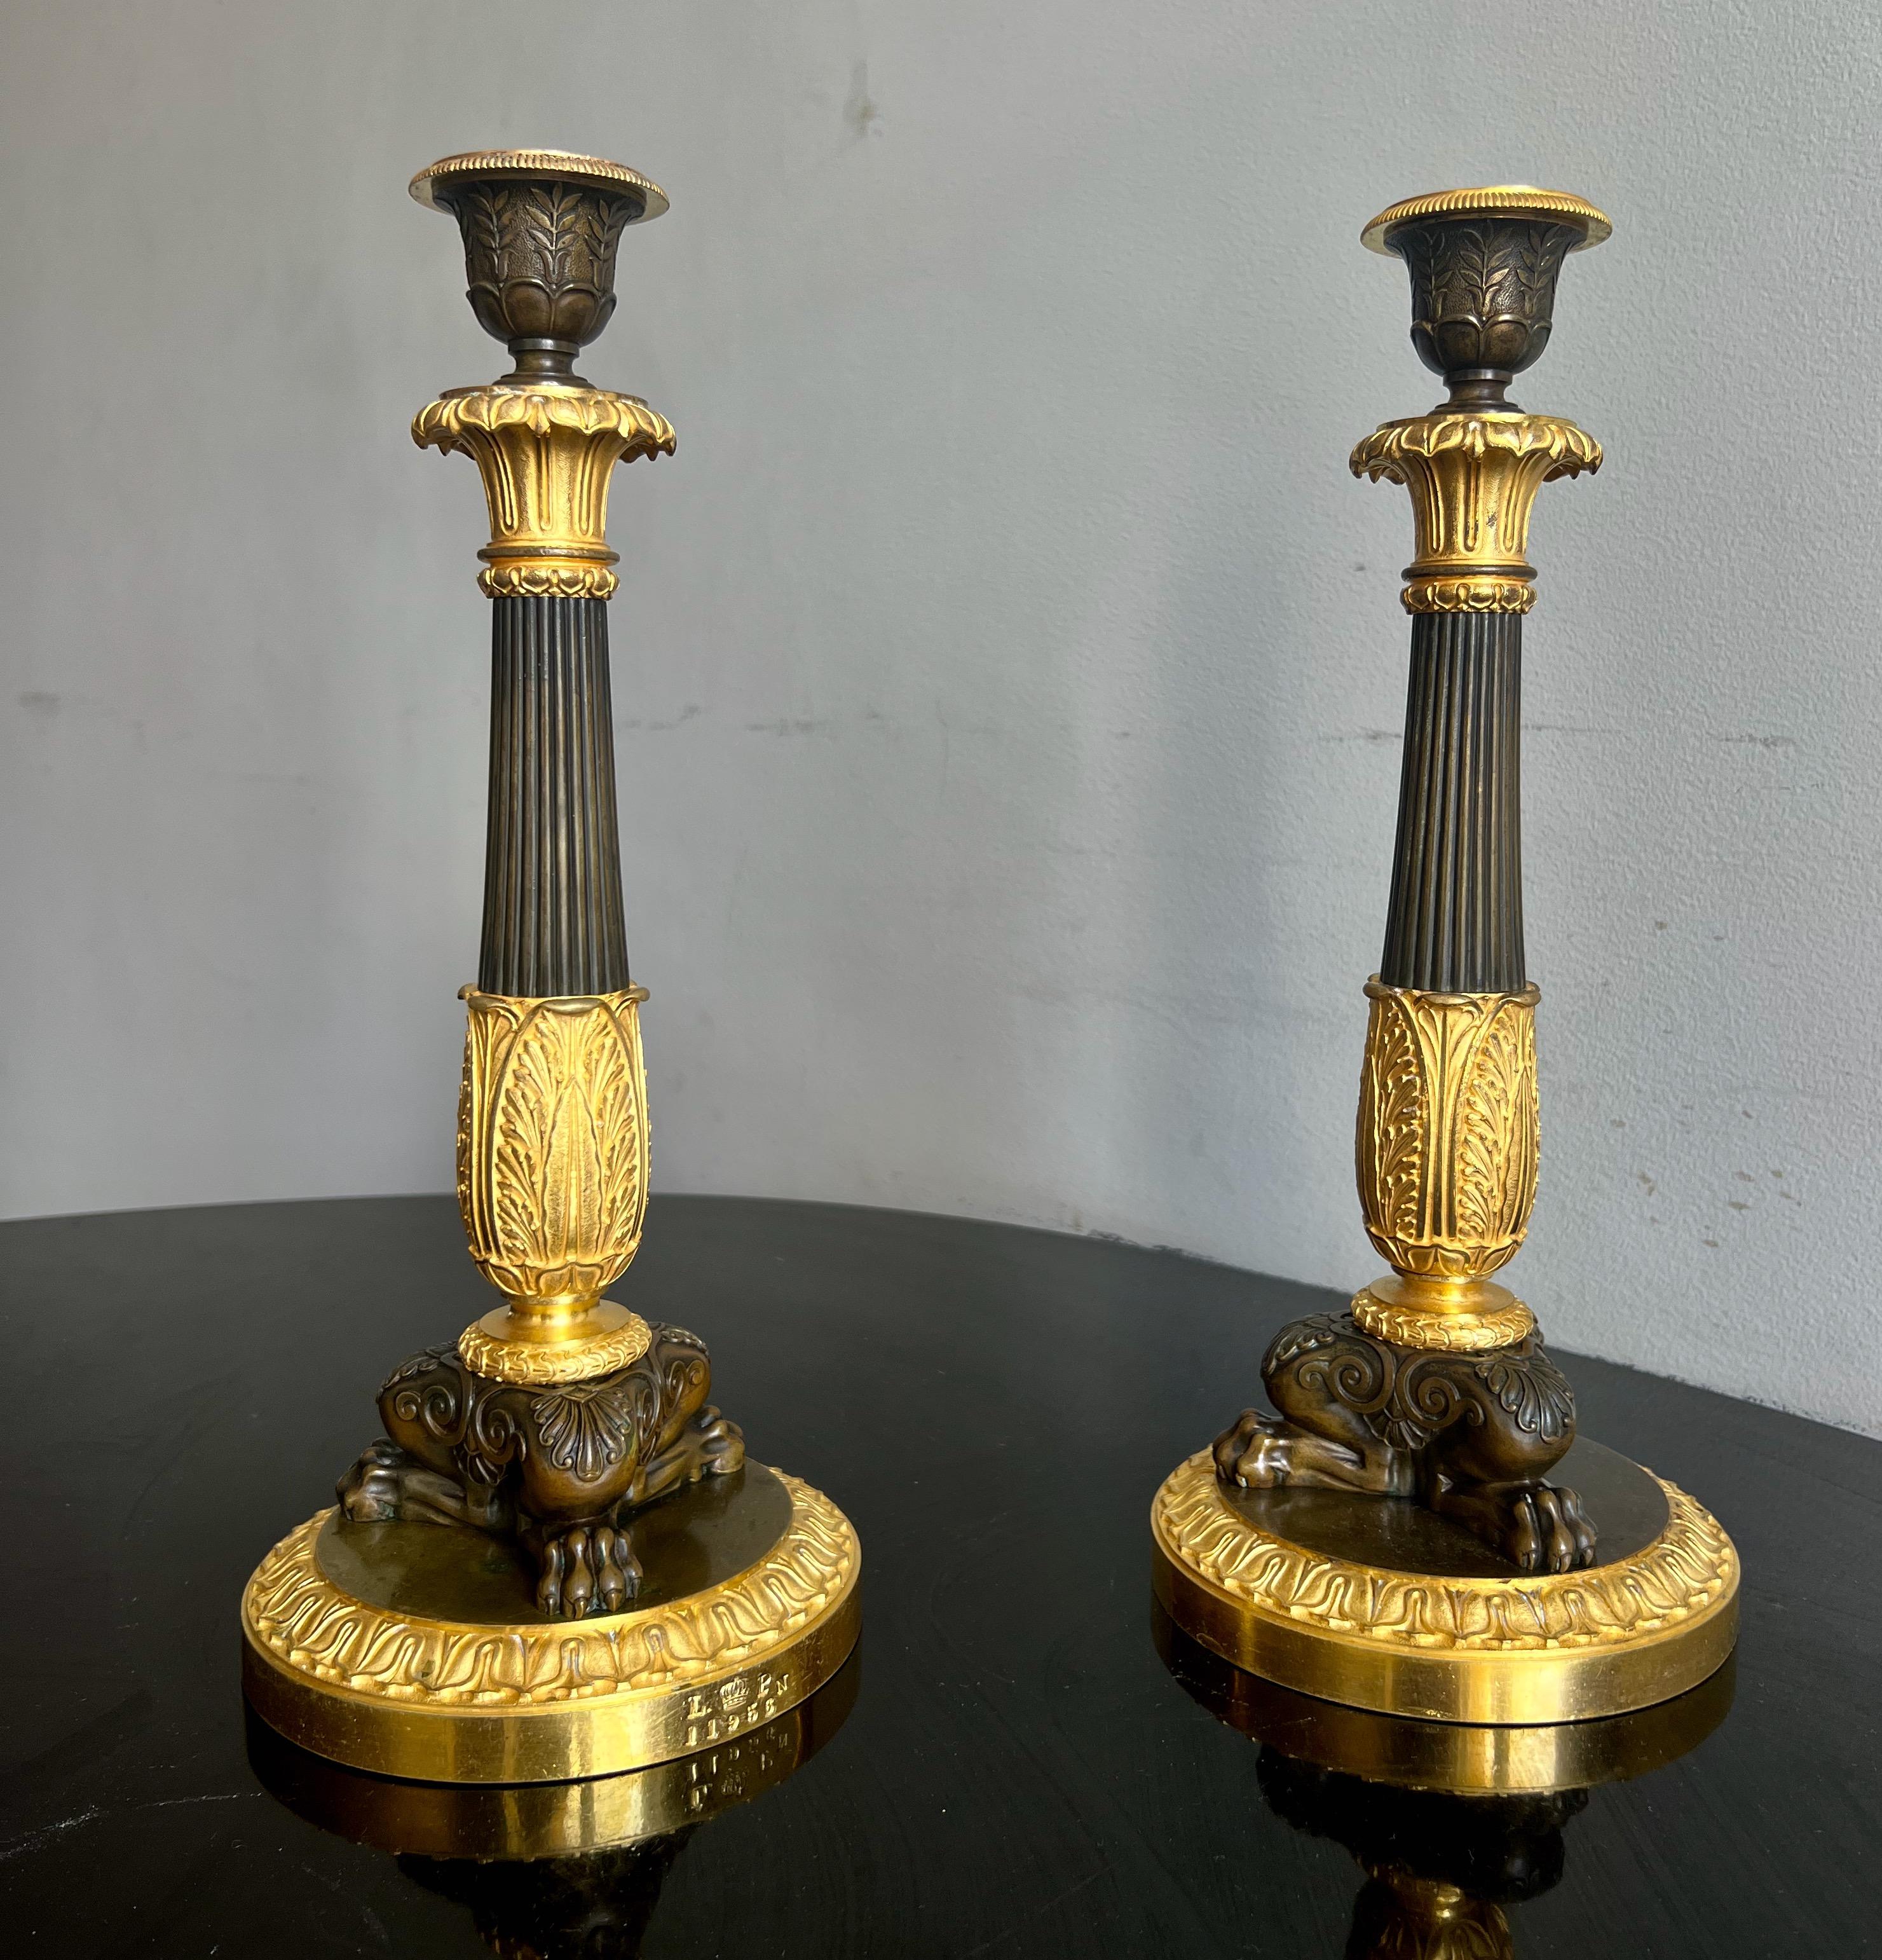 Pair of Royal Candlesticks from King Louis-Philippe's Chateau De Neuilly 6